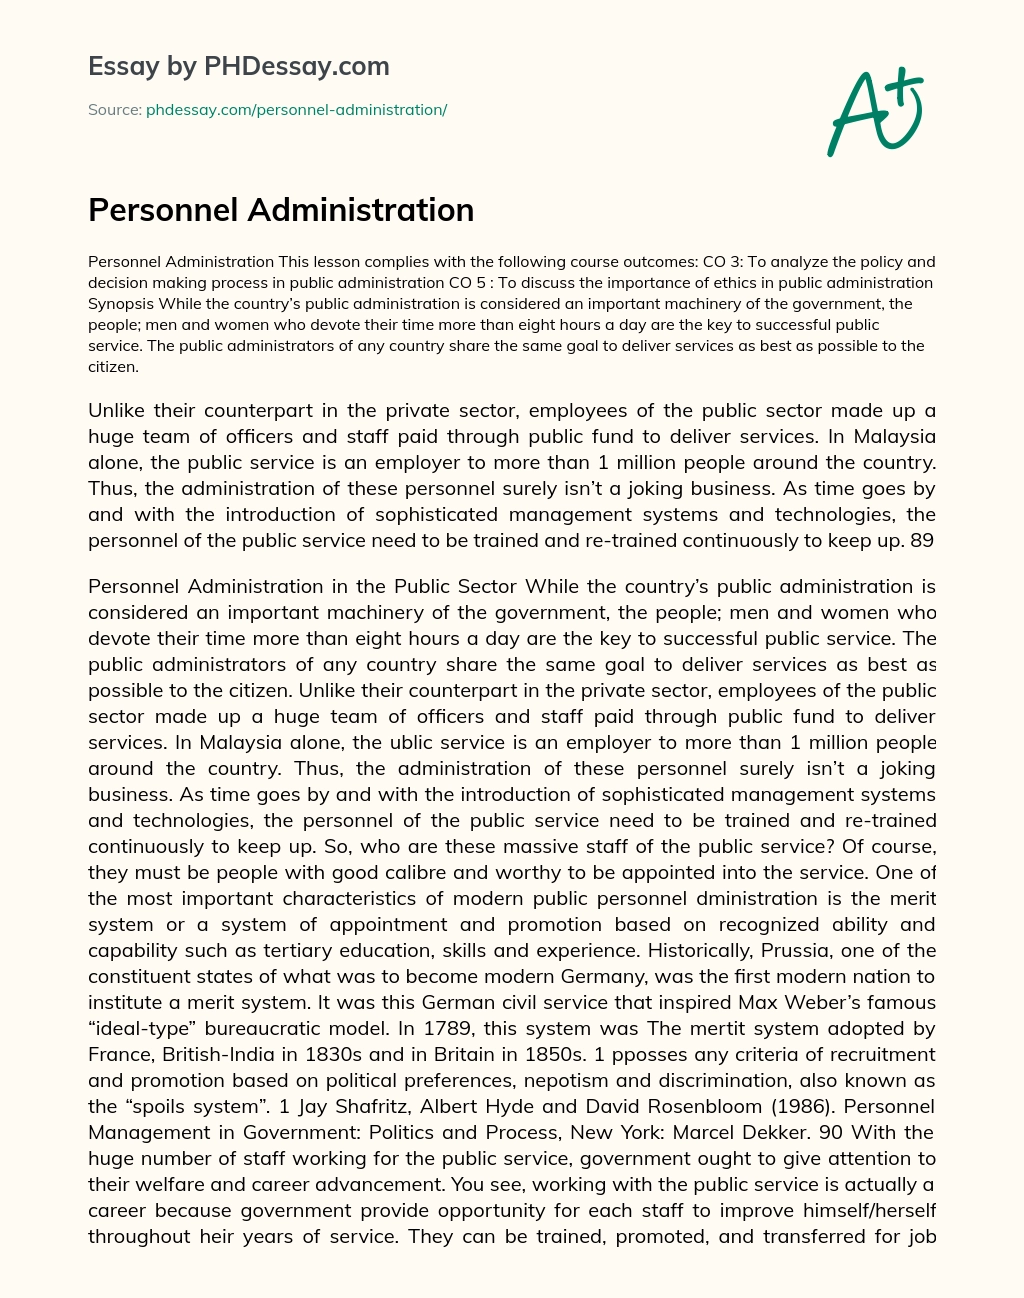 Personnel Administration essay